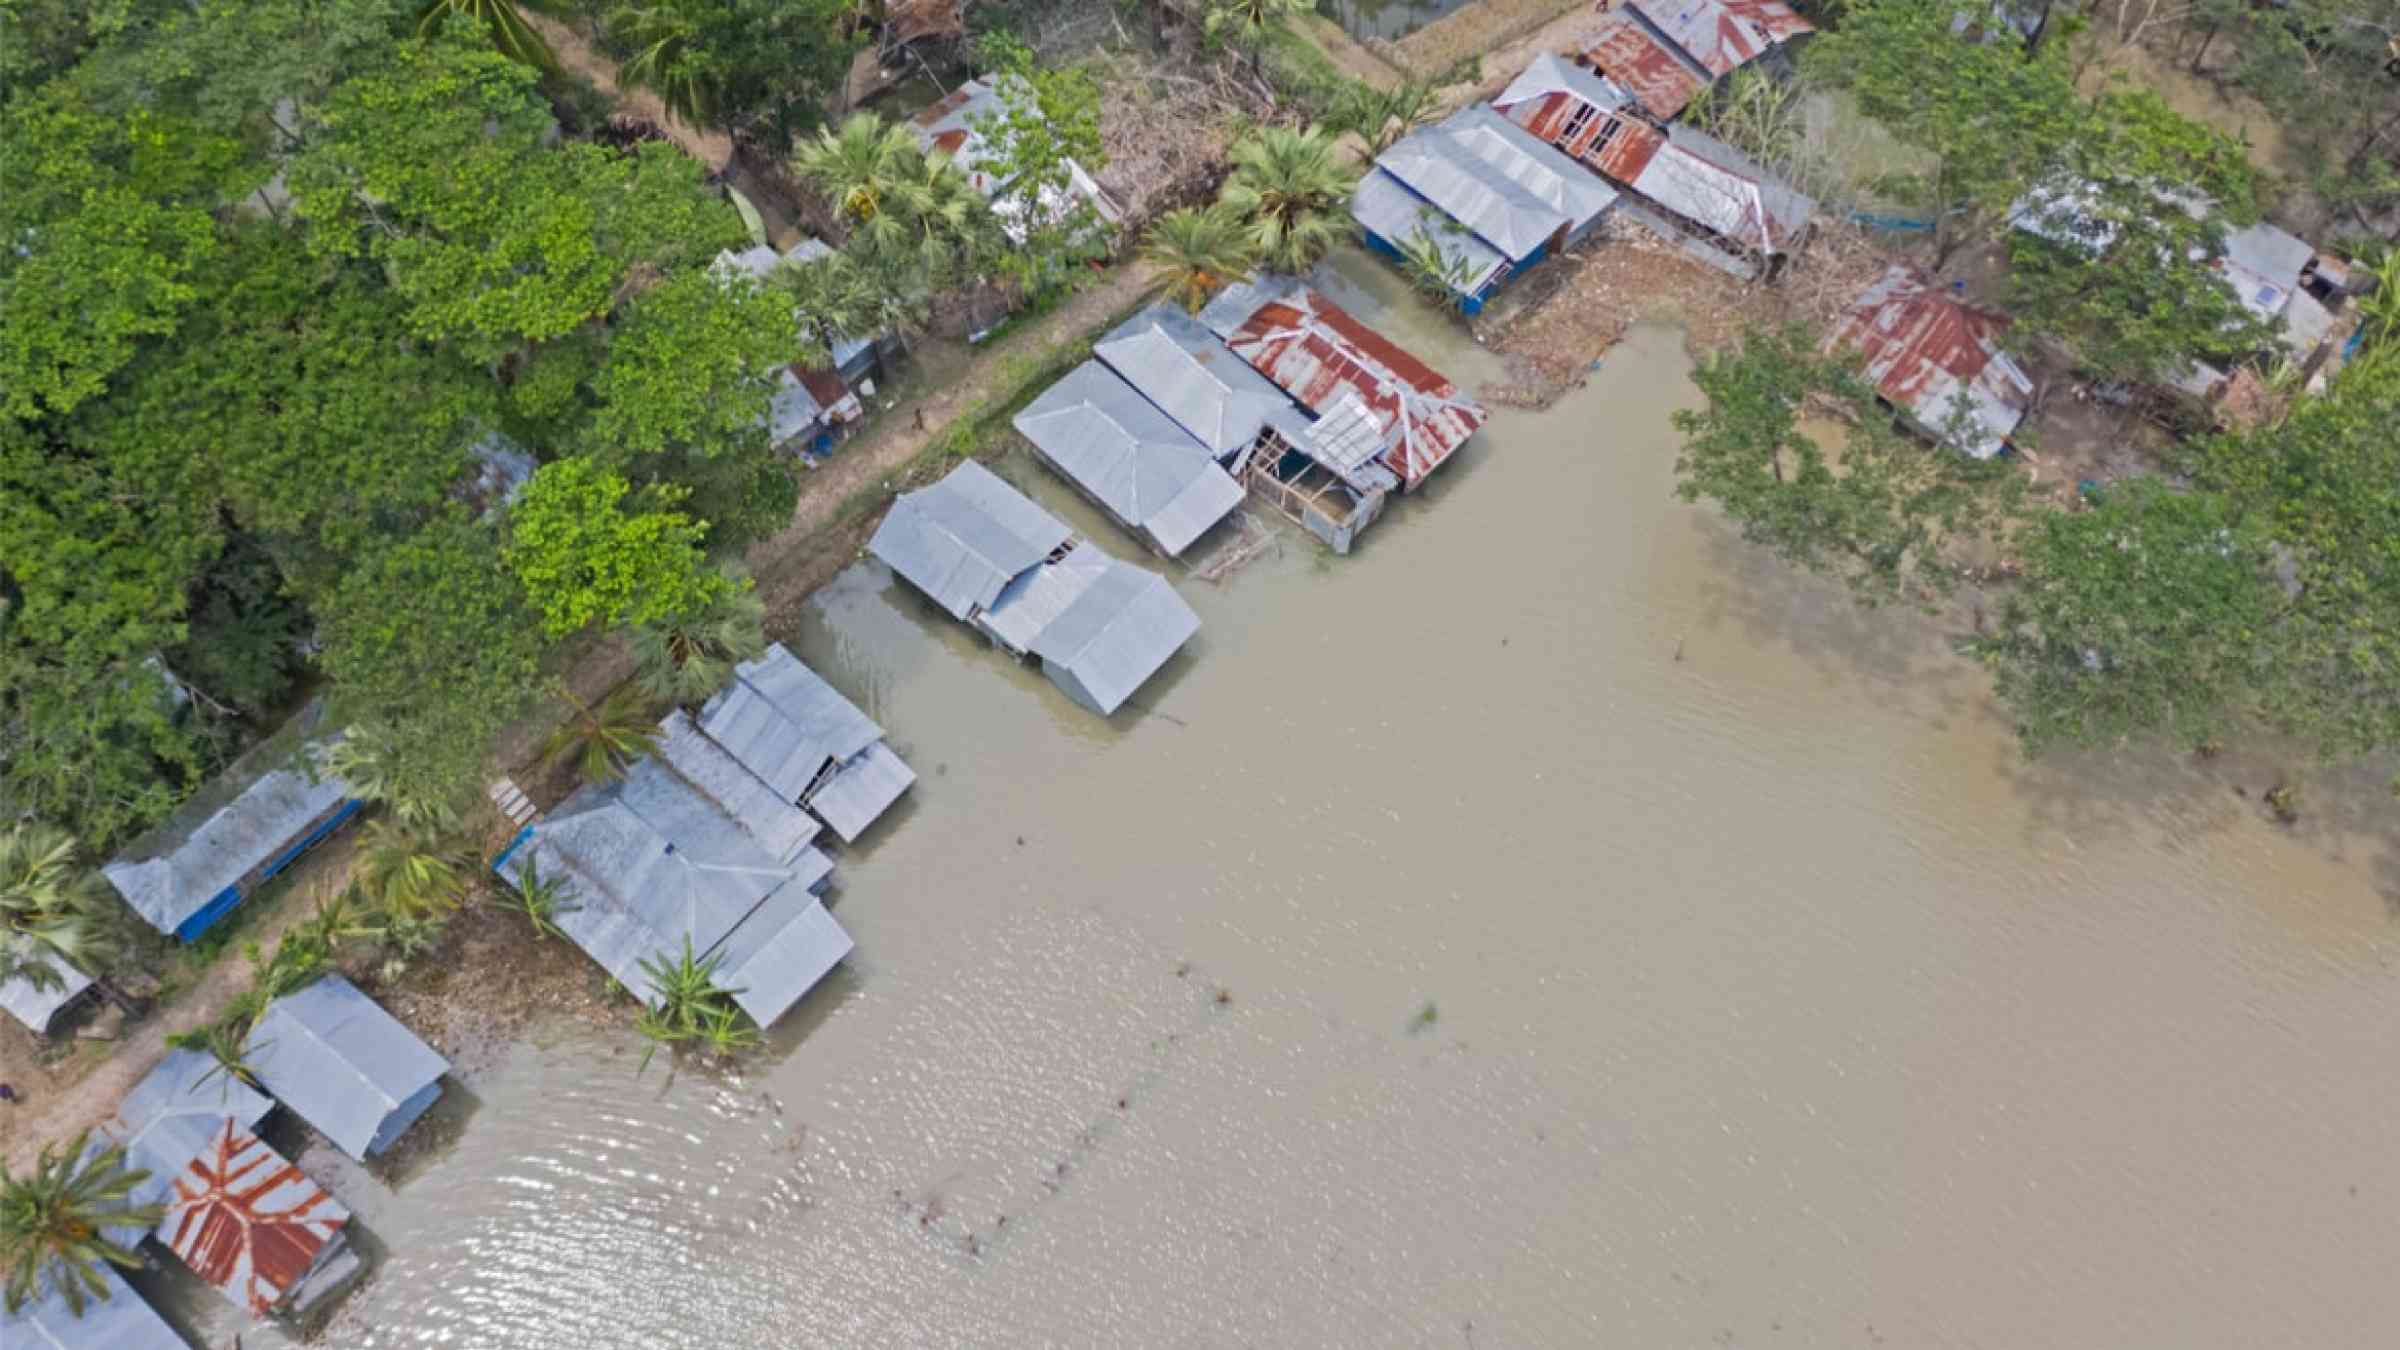 Aerial view of a flooded area in Bangladesh